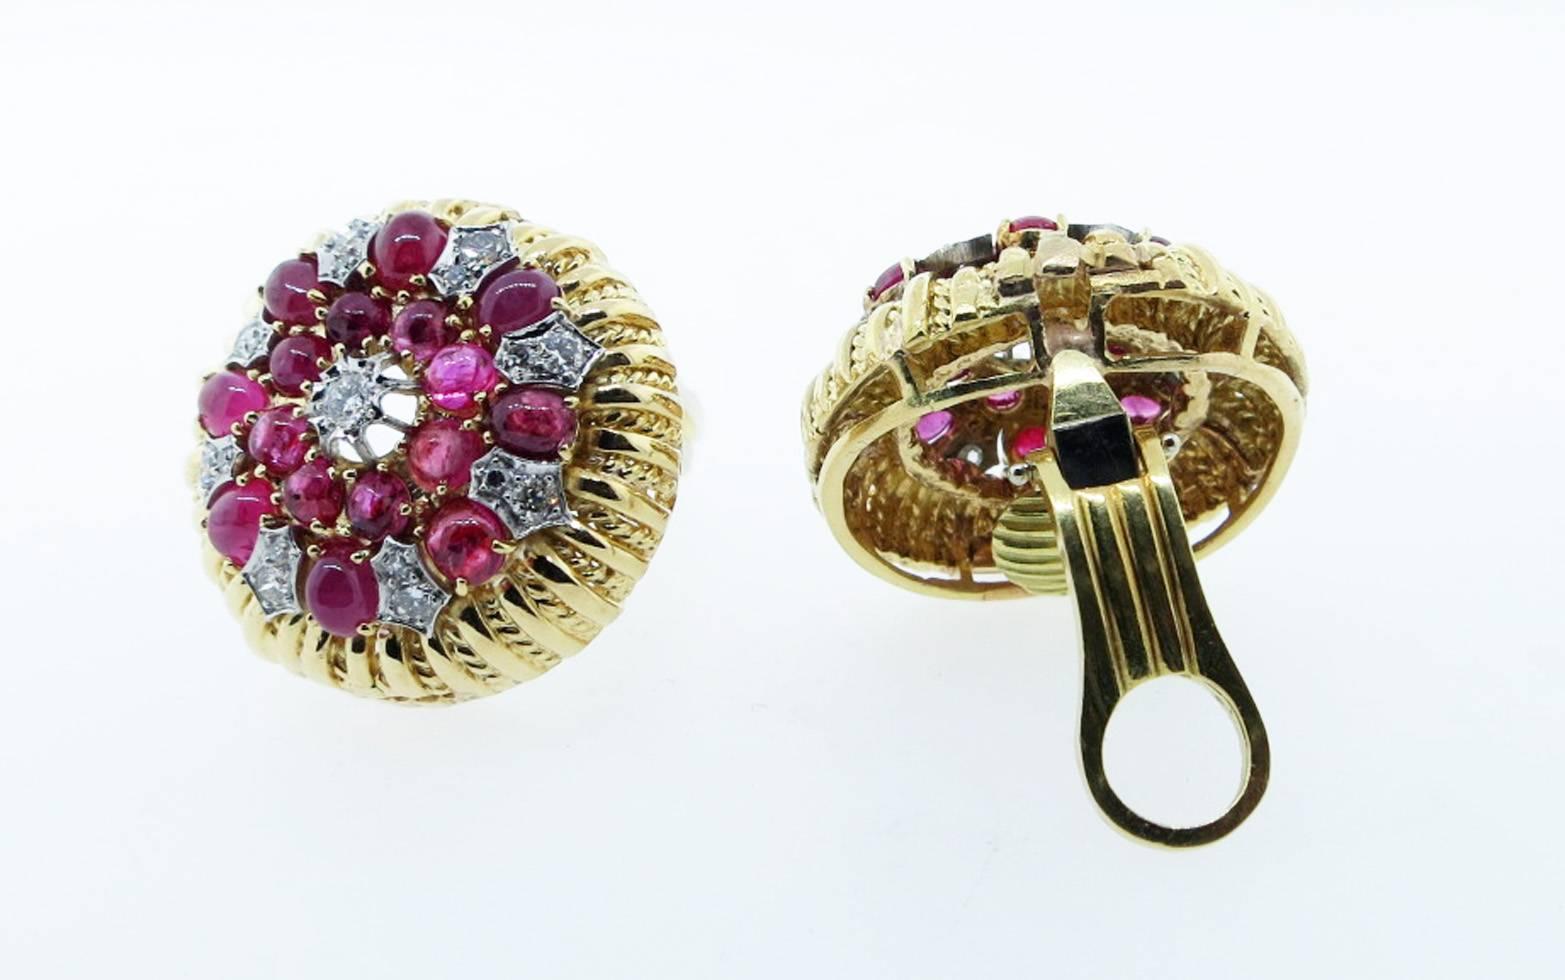 Fluted edge 18kt. yellow and white gold earrings. Each earring measures approx 1 inch and is set with 16 round natural rubies totaling approx 1.75cts. and 17 round brilliant cut diamonds totaling approx .50cts. The earrings are clip back posts can